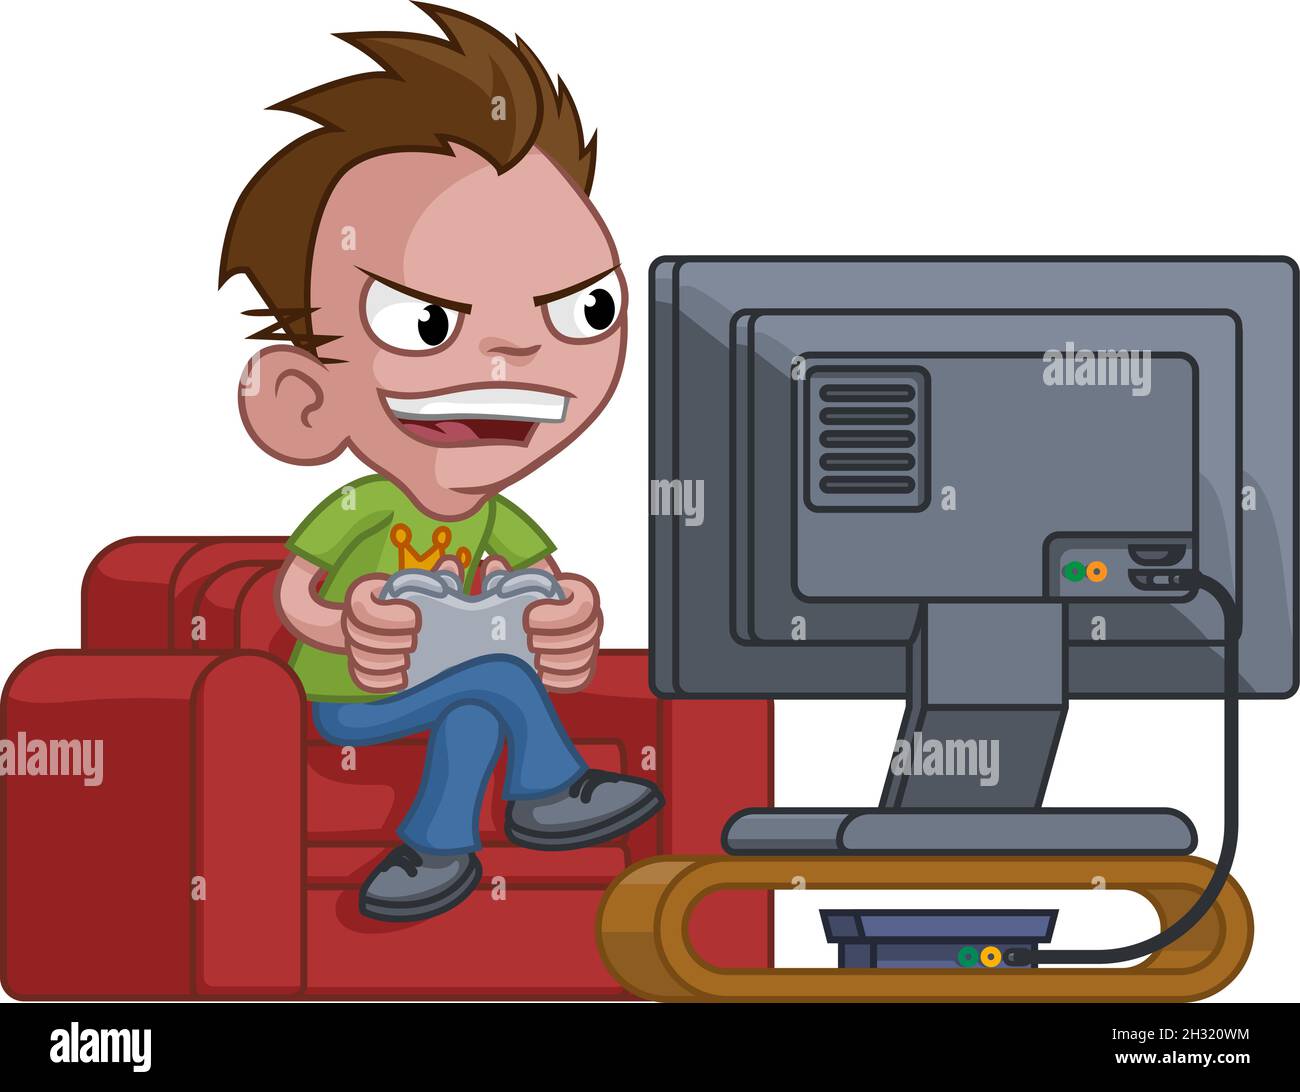 Kid Boy Gamer Playing Video Games Console Cartoon Stock Vector